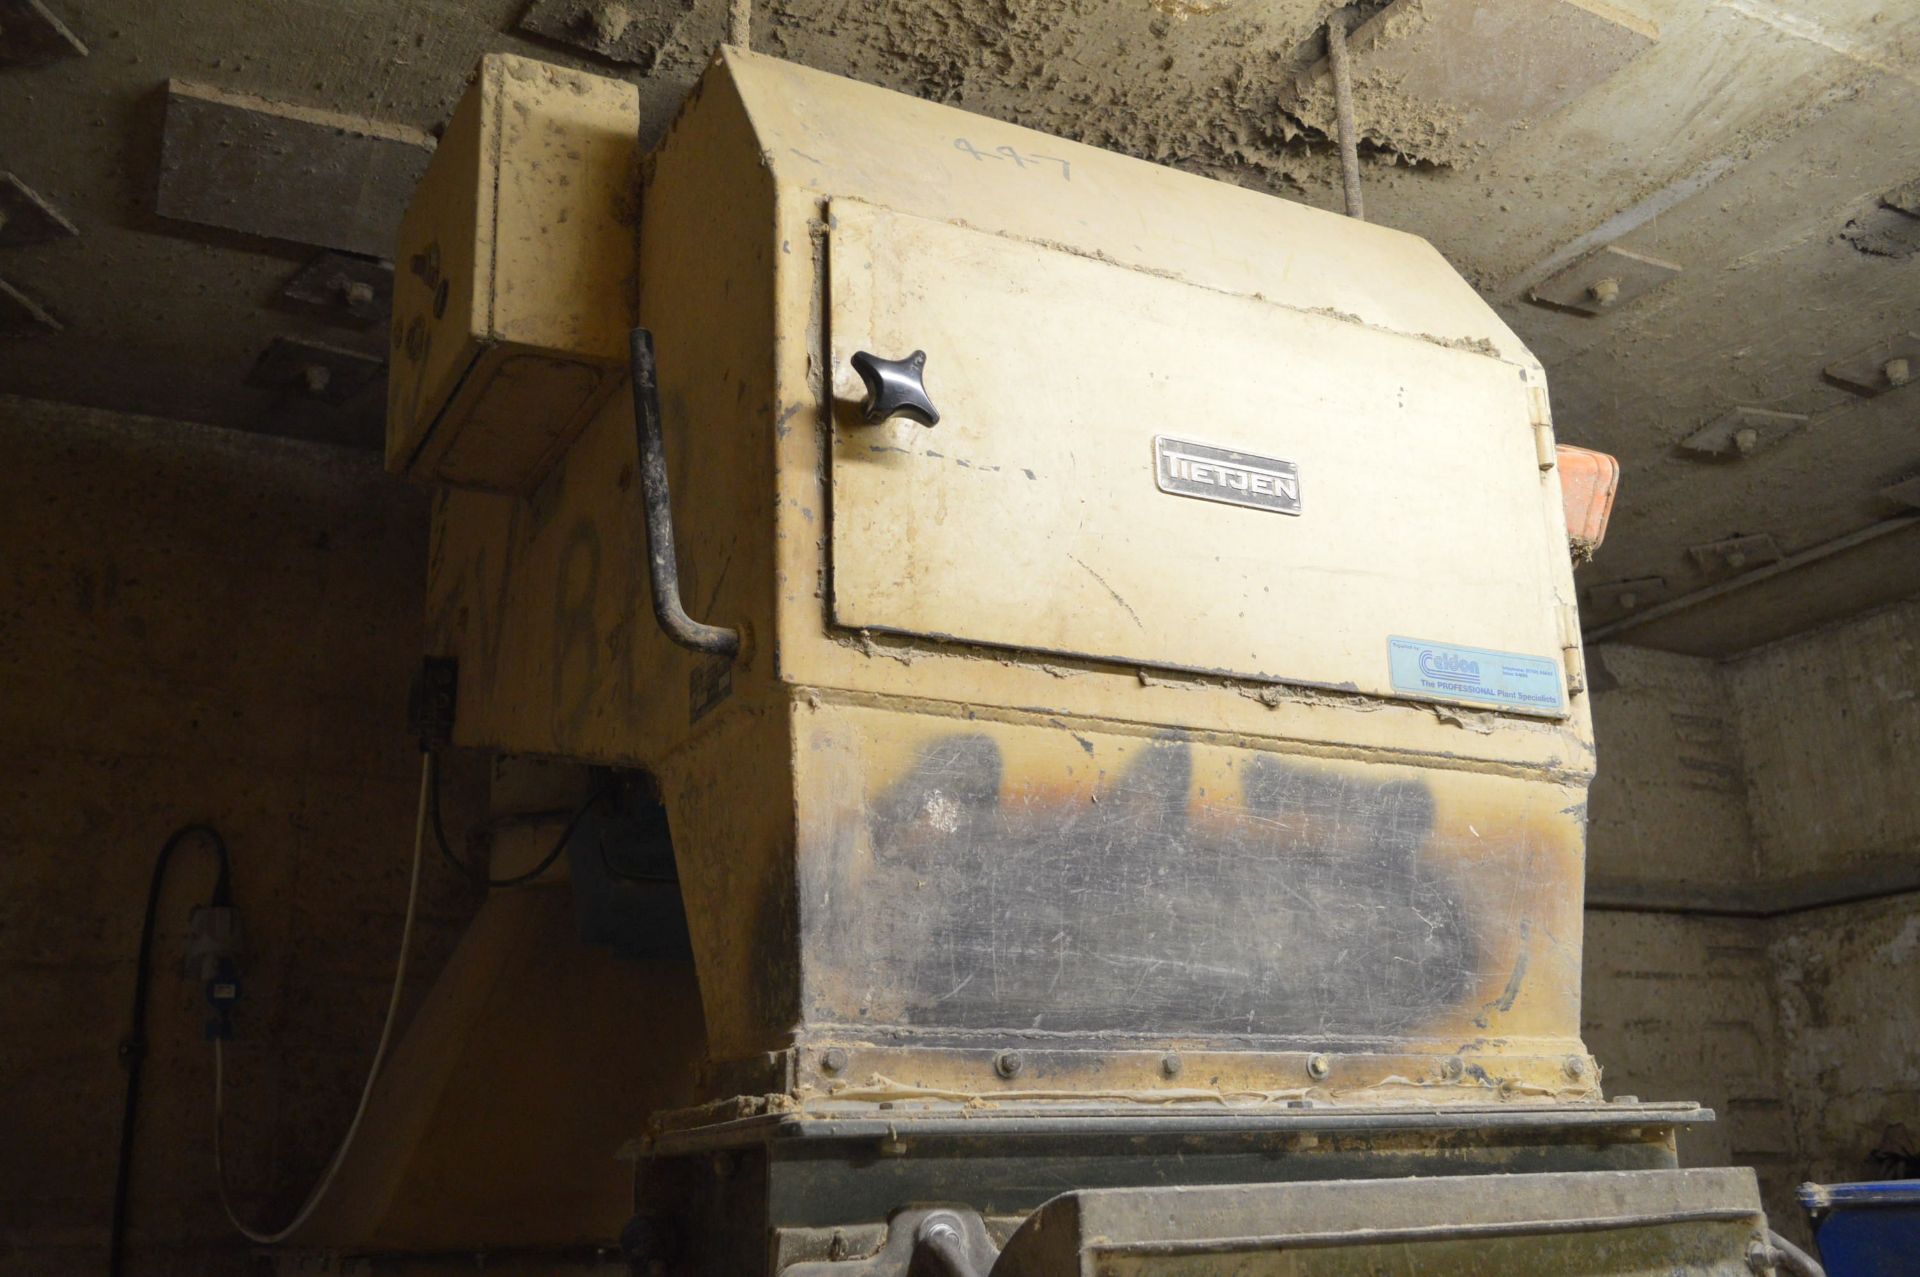 Christy & Norris X26/2 HAMMER MILL GRINDER, with Brook CP 150kW electric motor, 2965rpm, Tietjen - Image 2 of 8